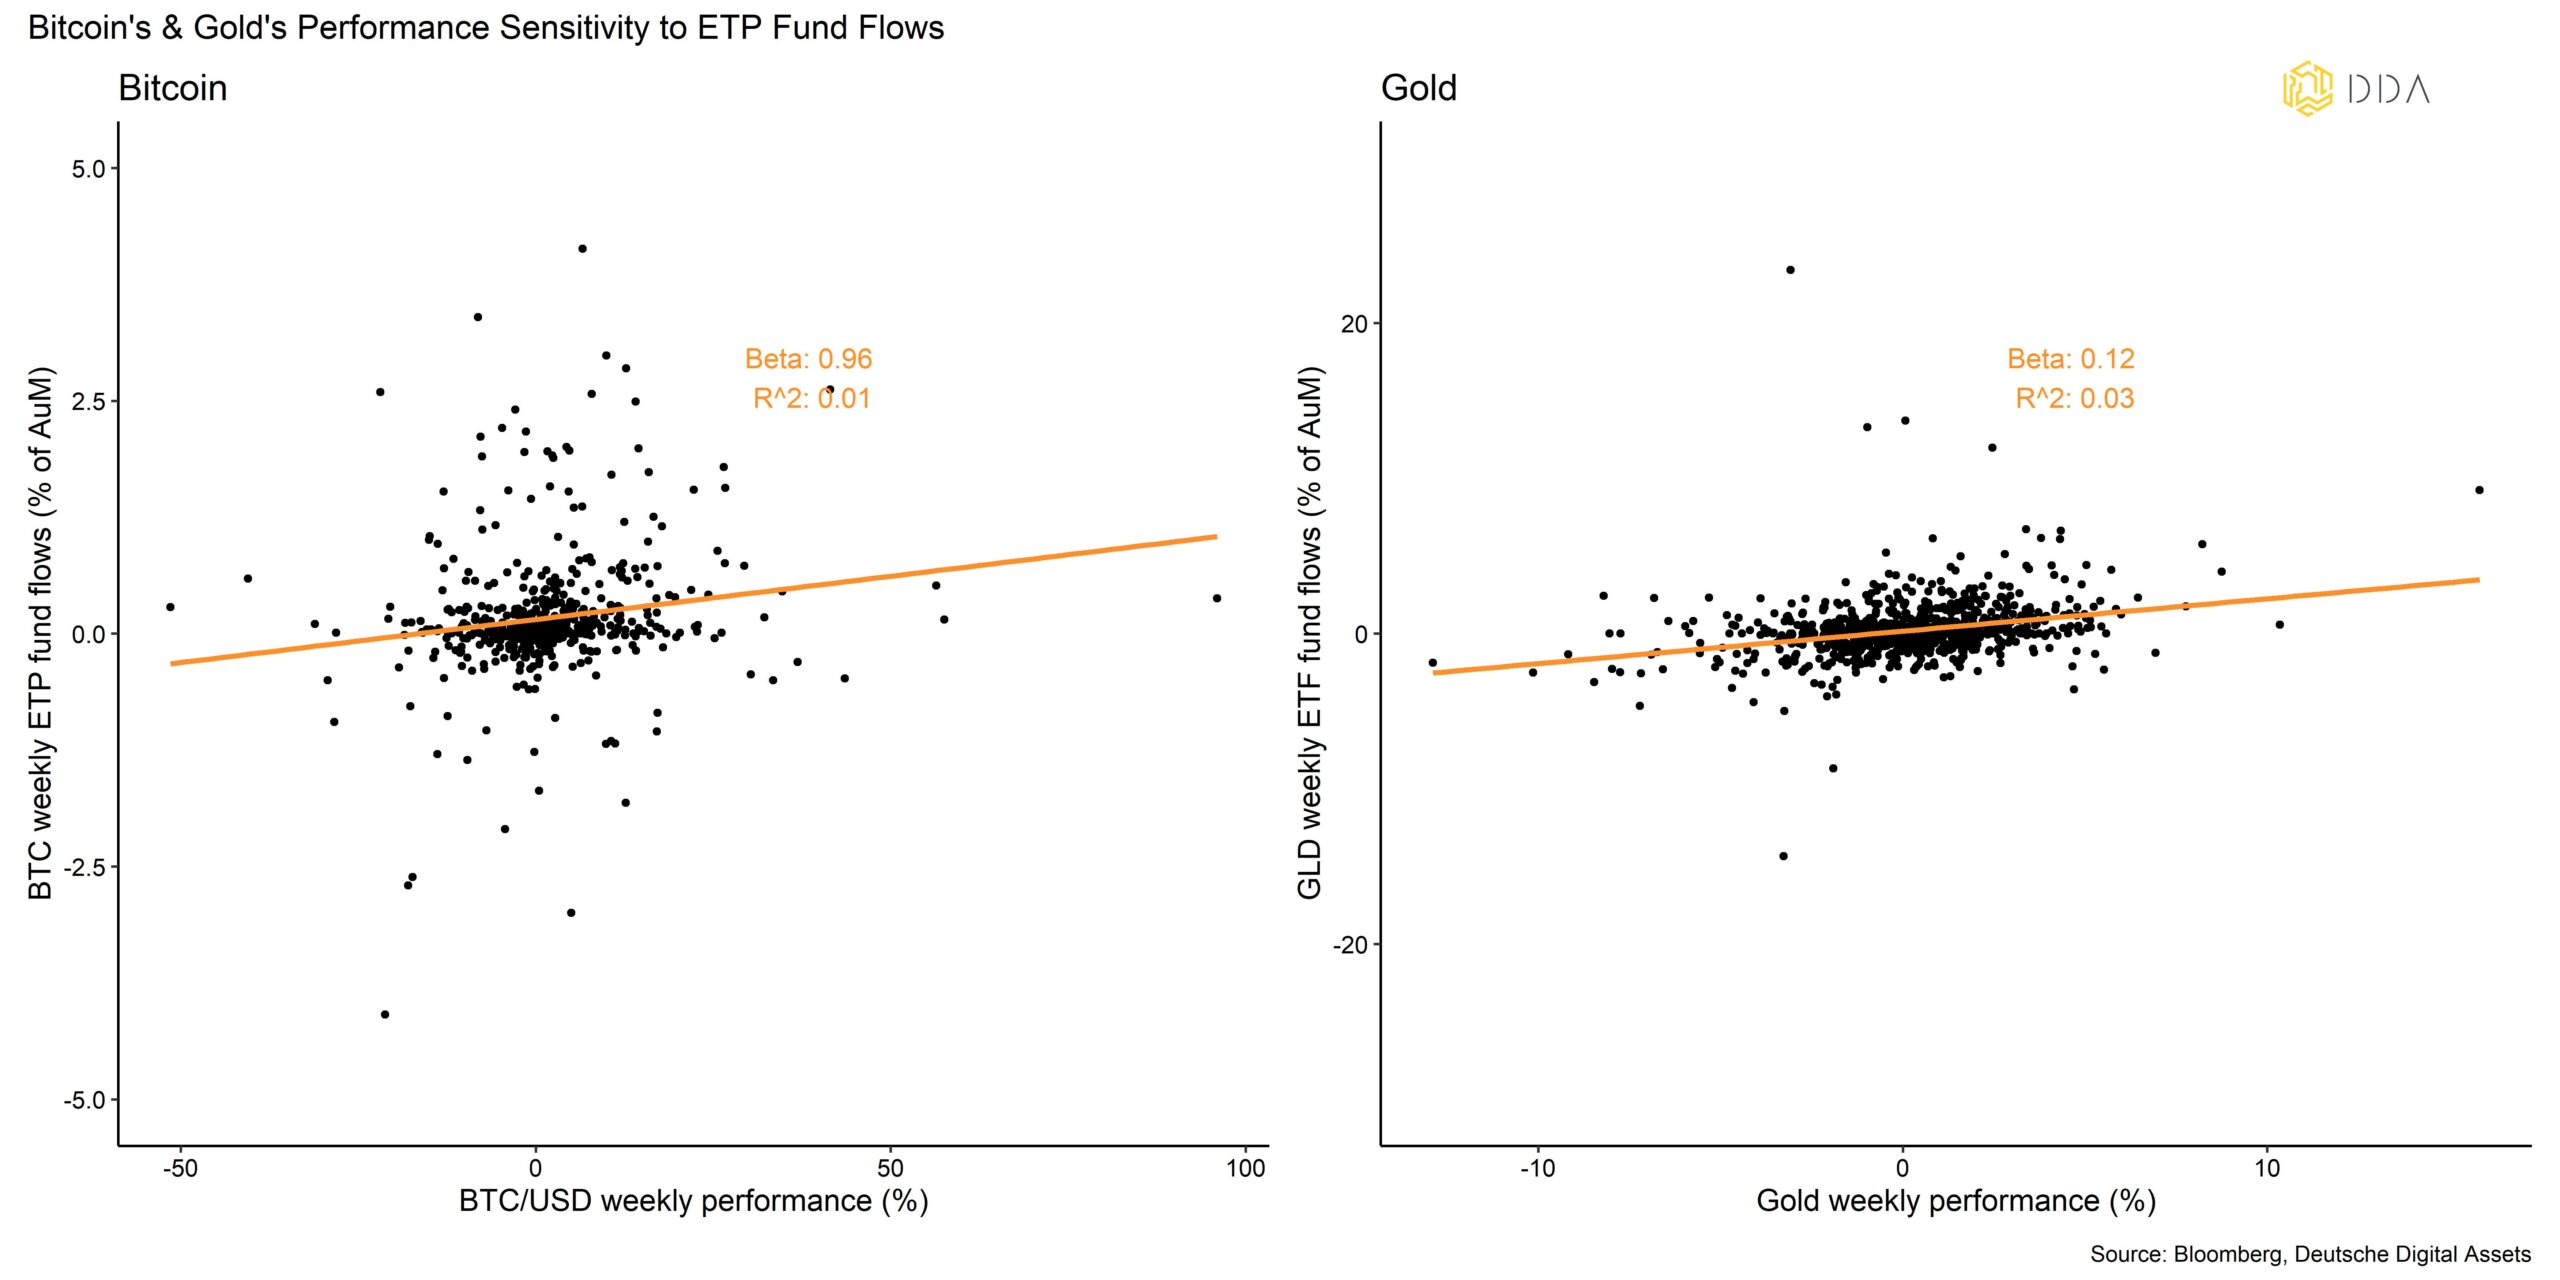 Bitcoin and gold's performance sensitivity to ETP Fund flows